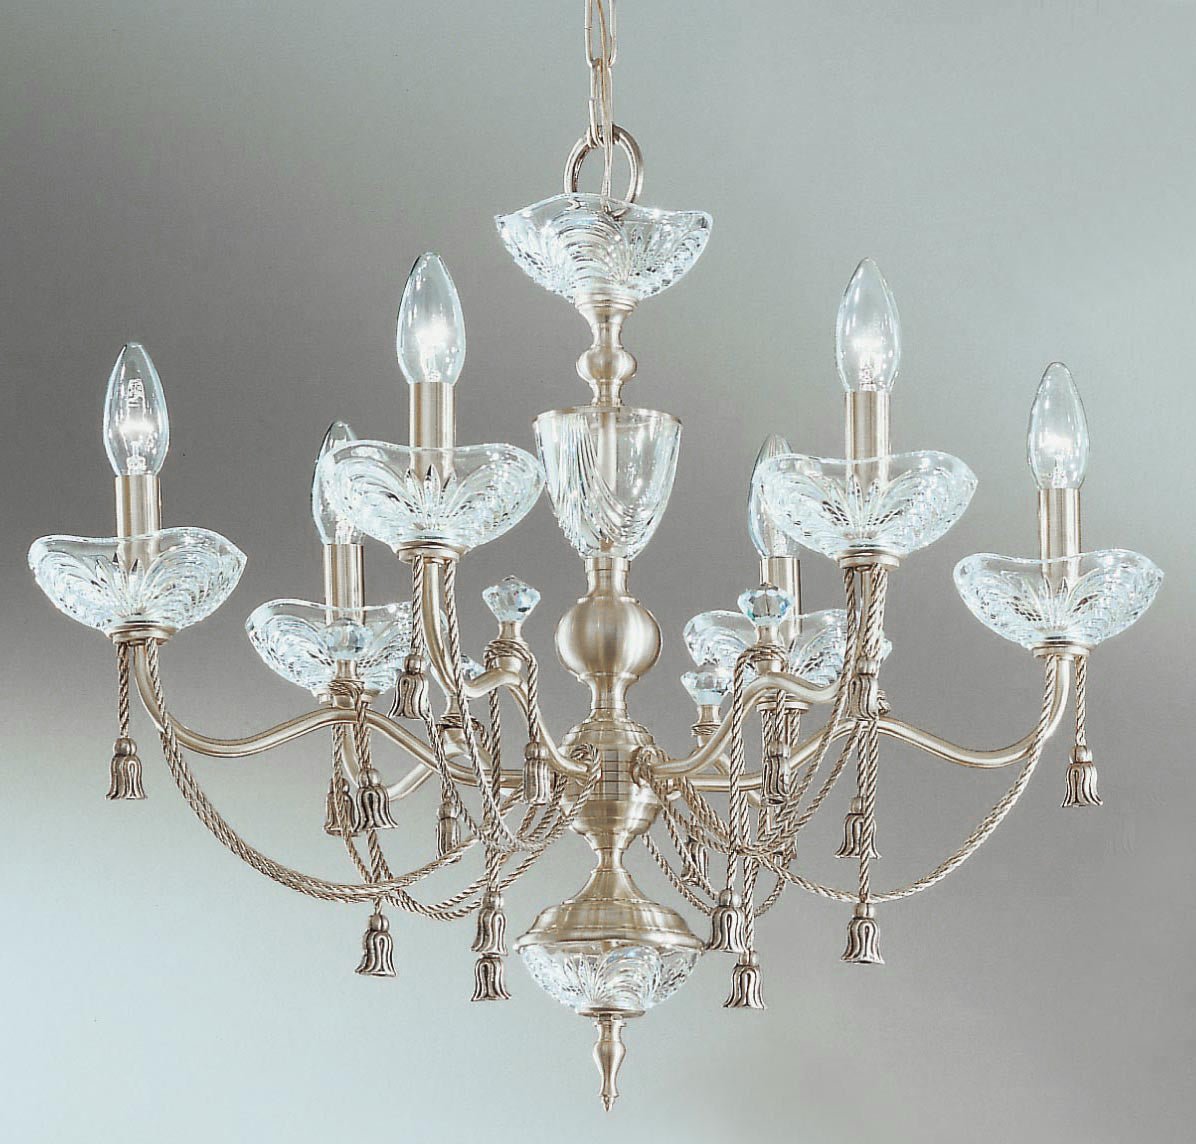 Classic Lighting 5496 SN Devonshire Traditional Chandelier in Satin Nickel (Imported from Spain)